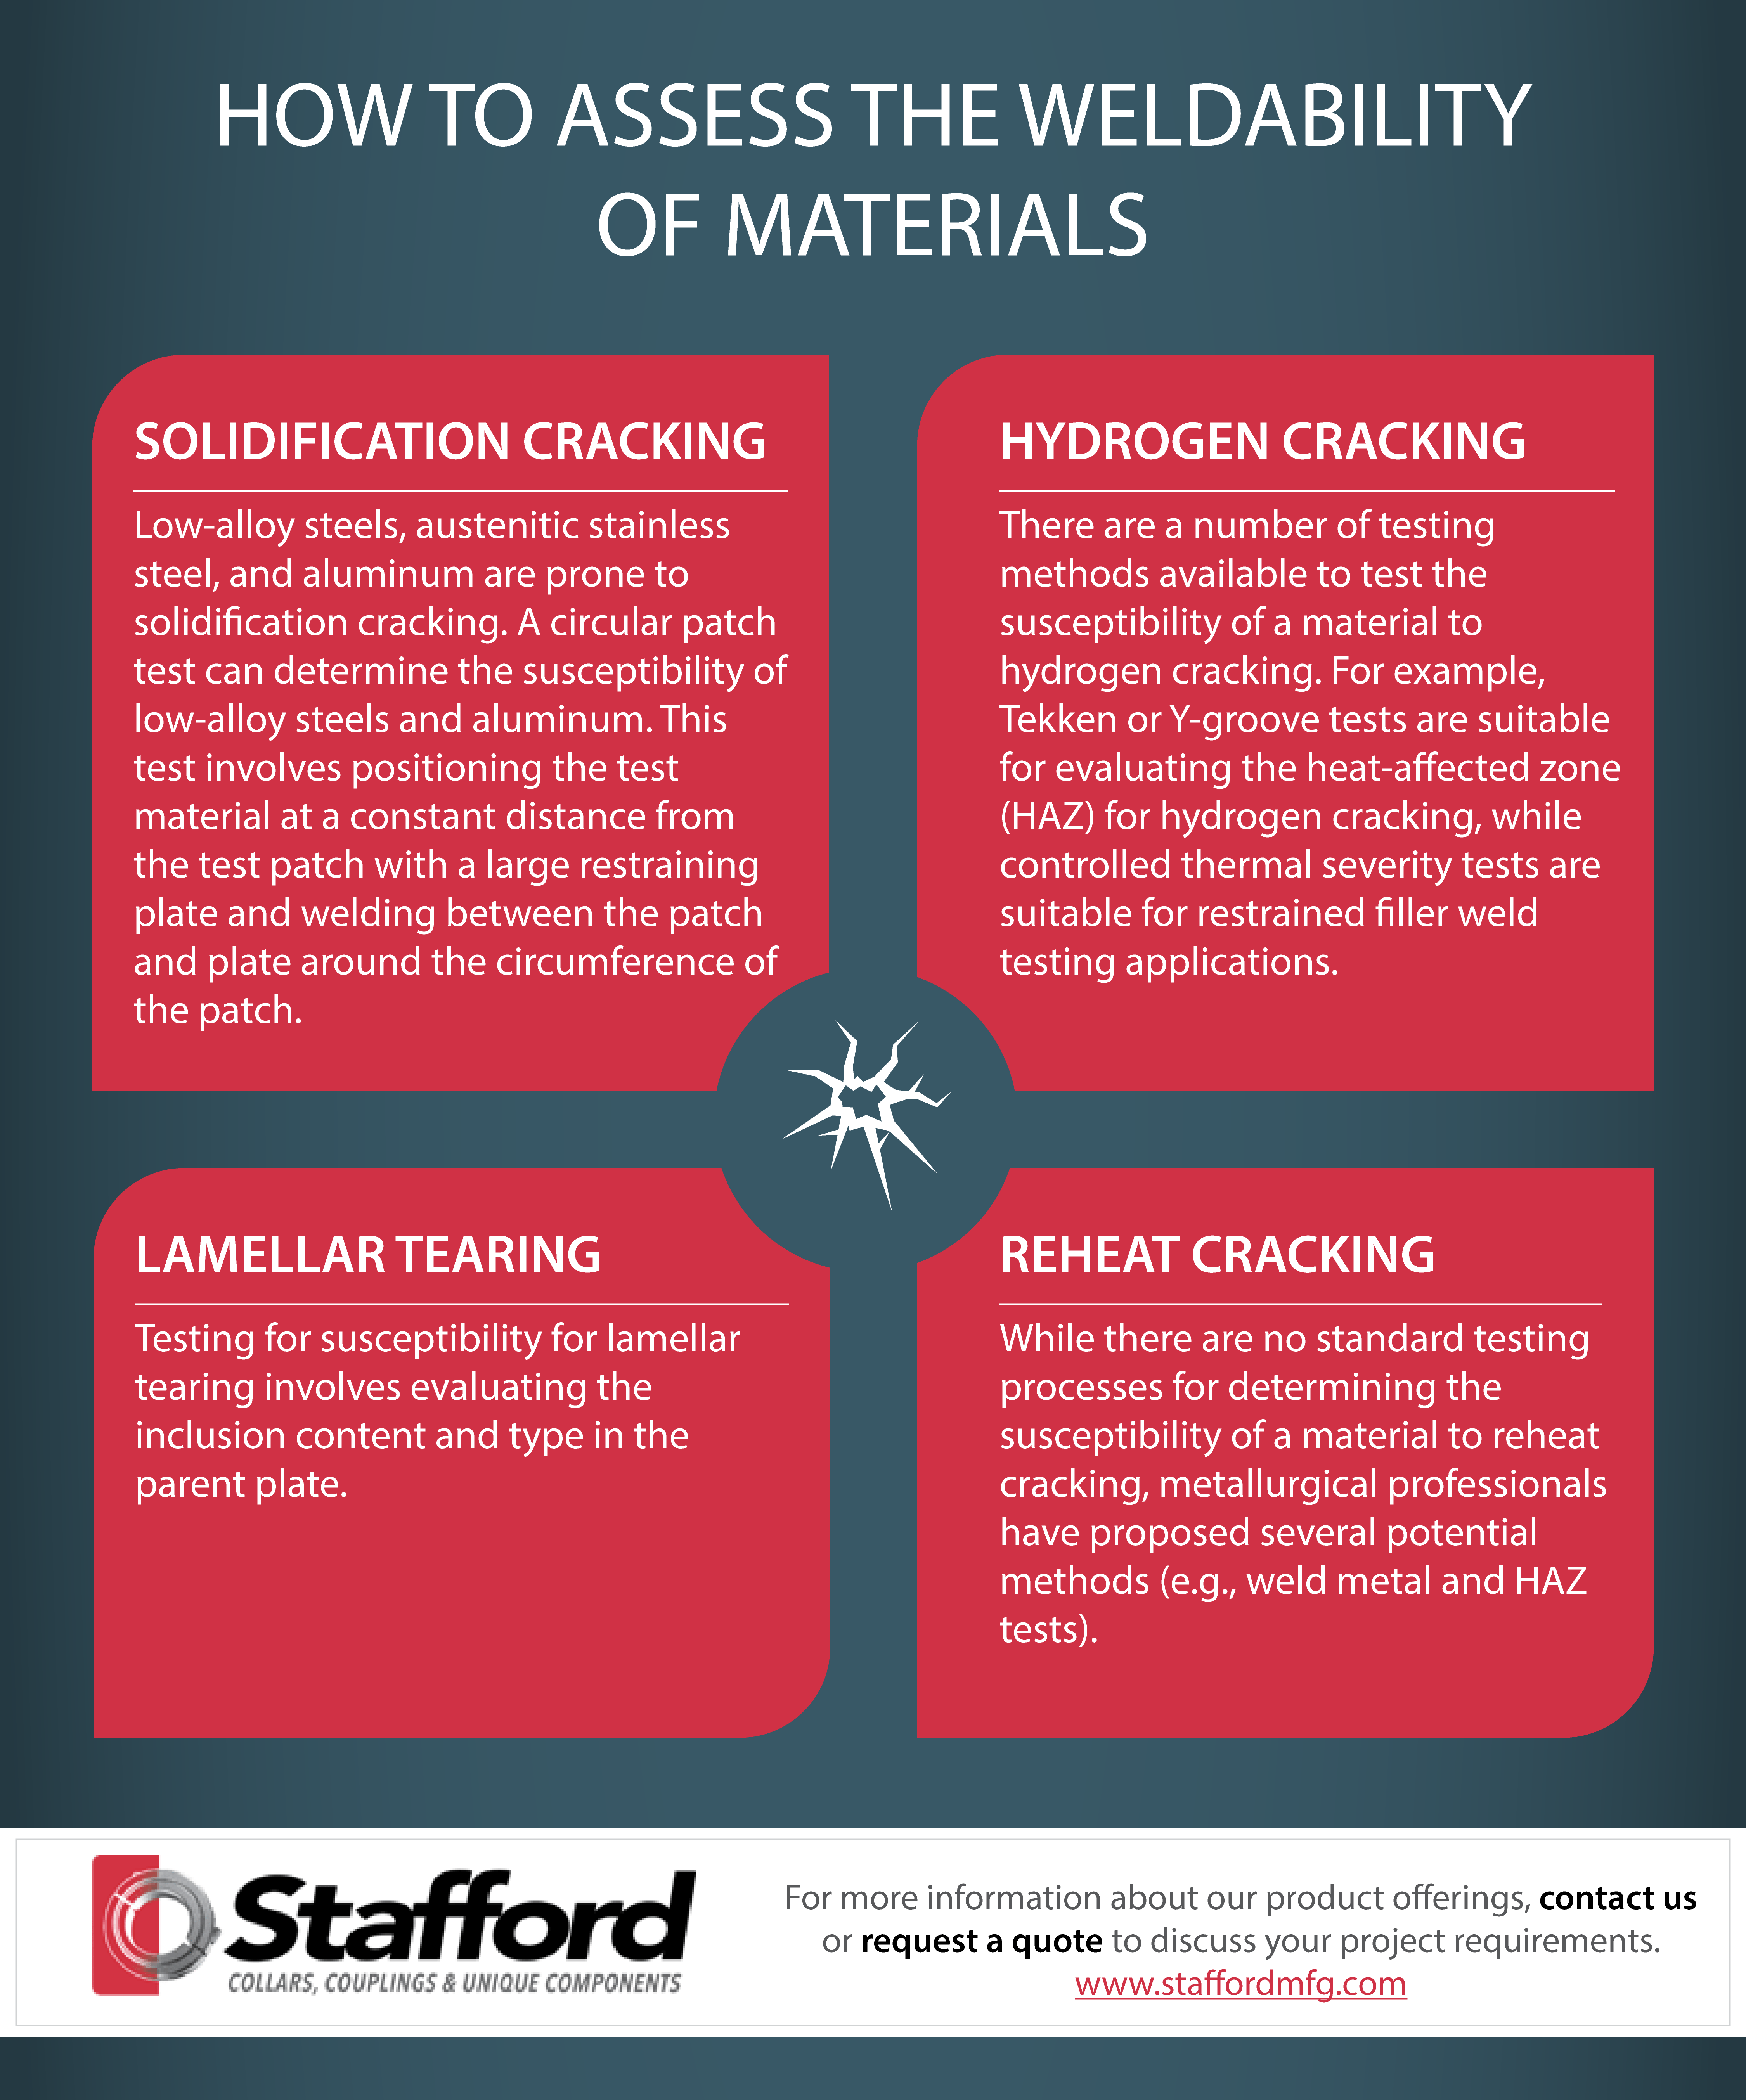 How to Assess the Weldability of Materials